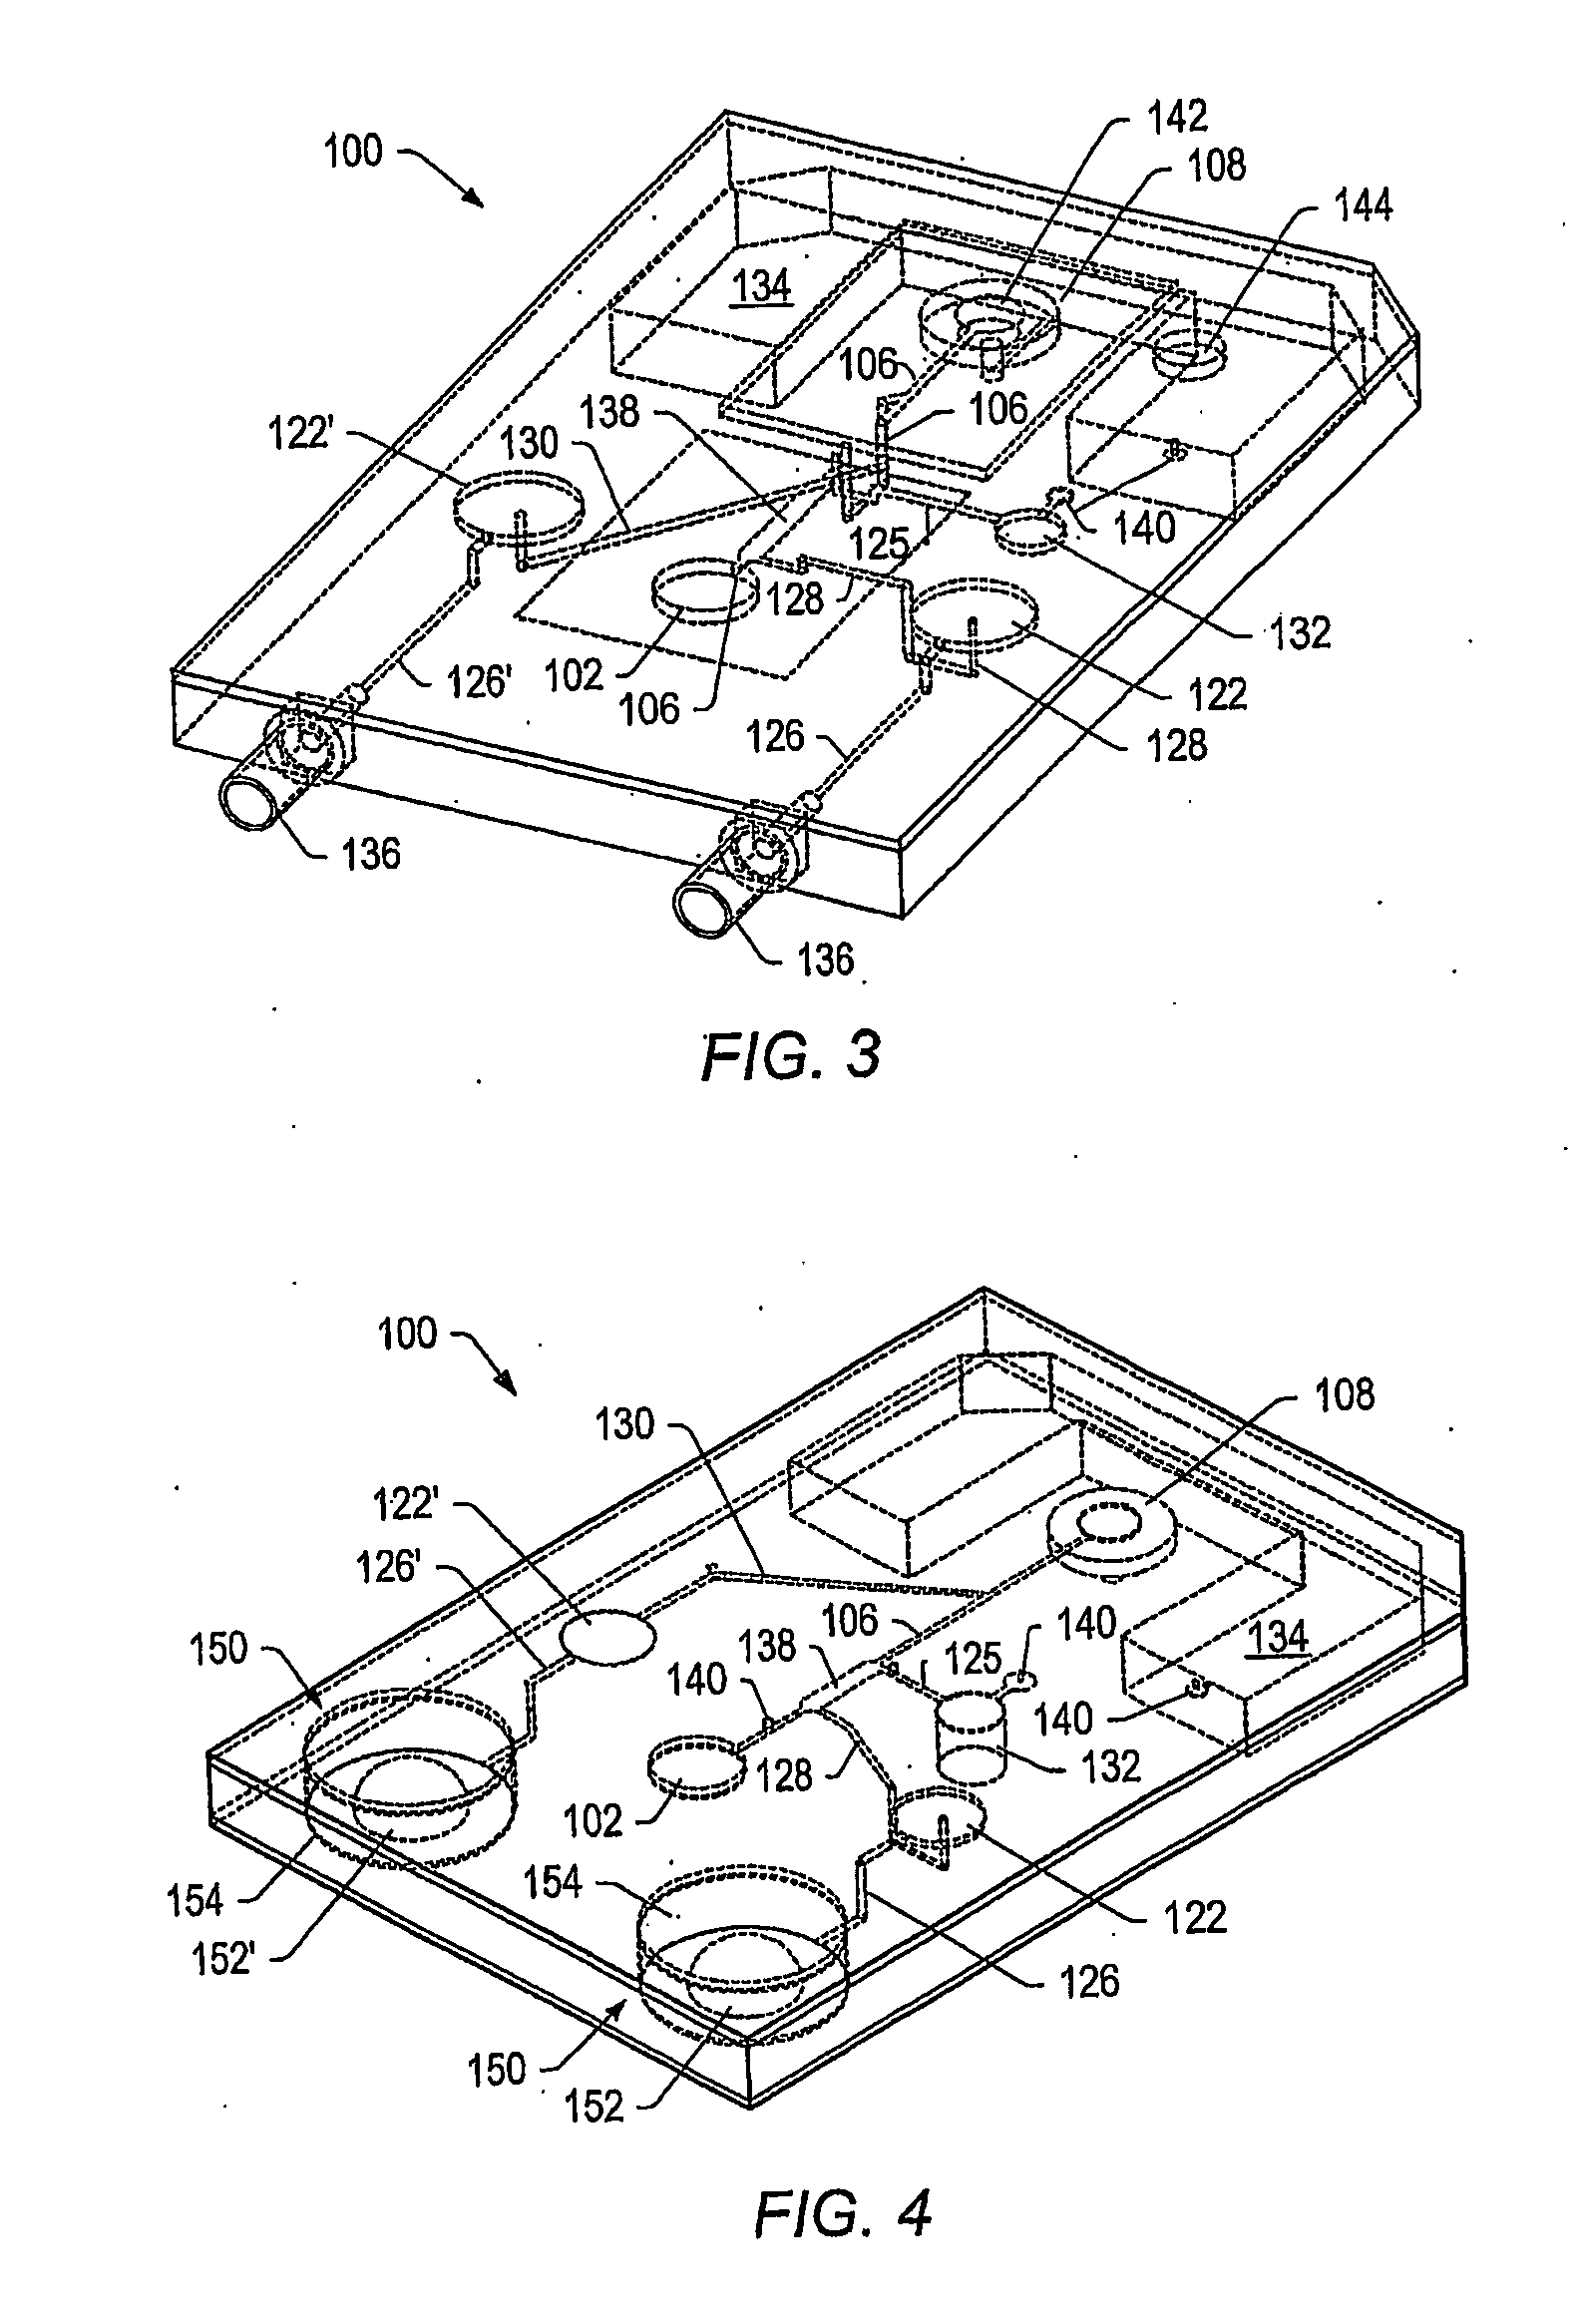 Systems and methods including self-contained cartridges with detection systems and fluid delivery systems